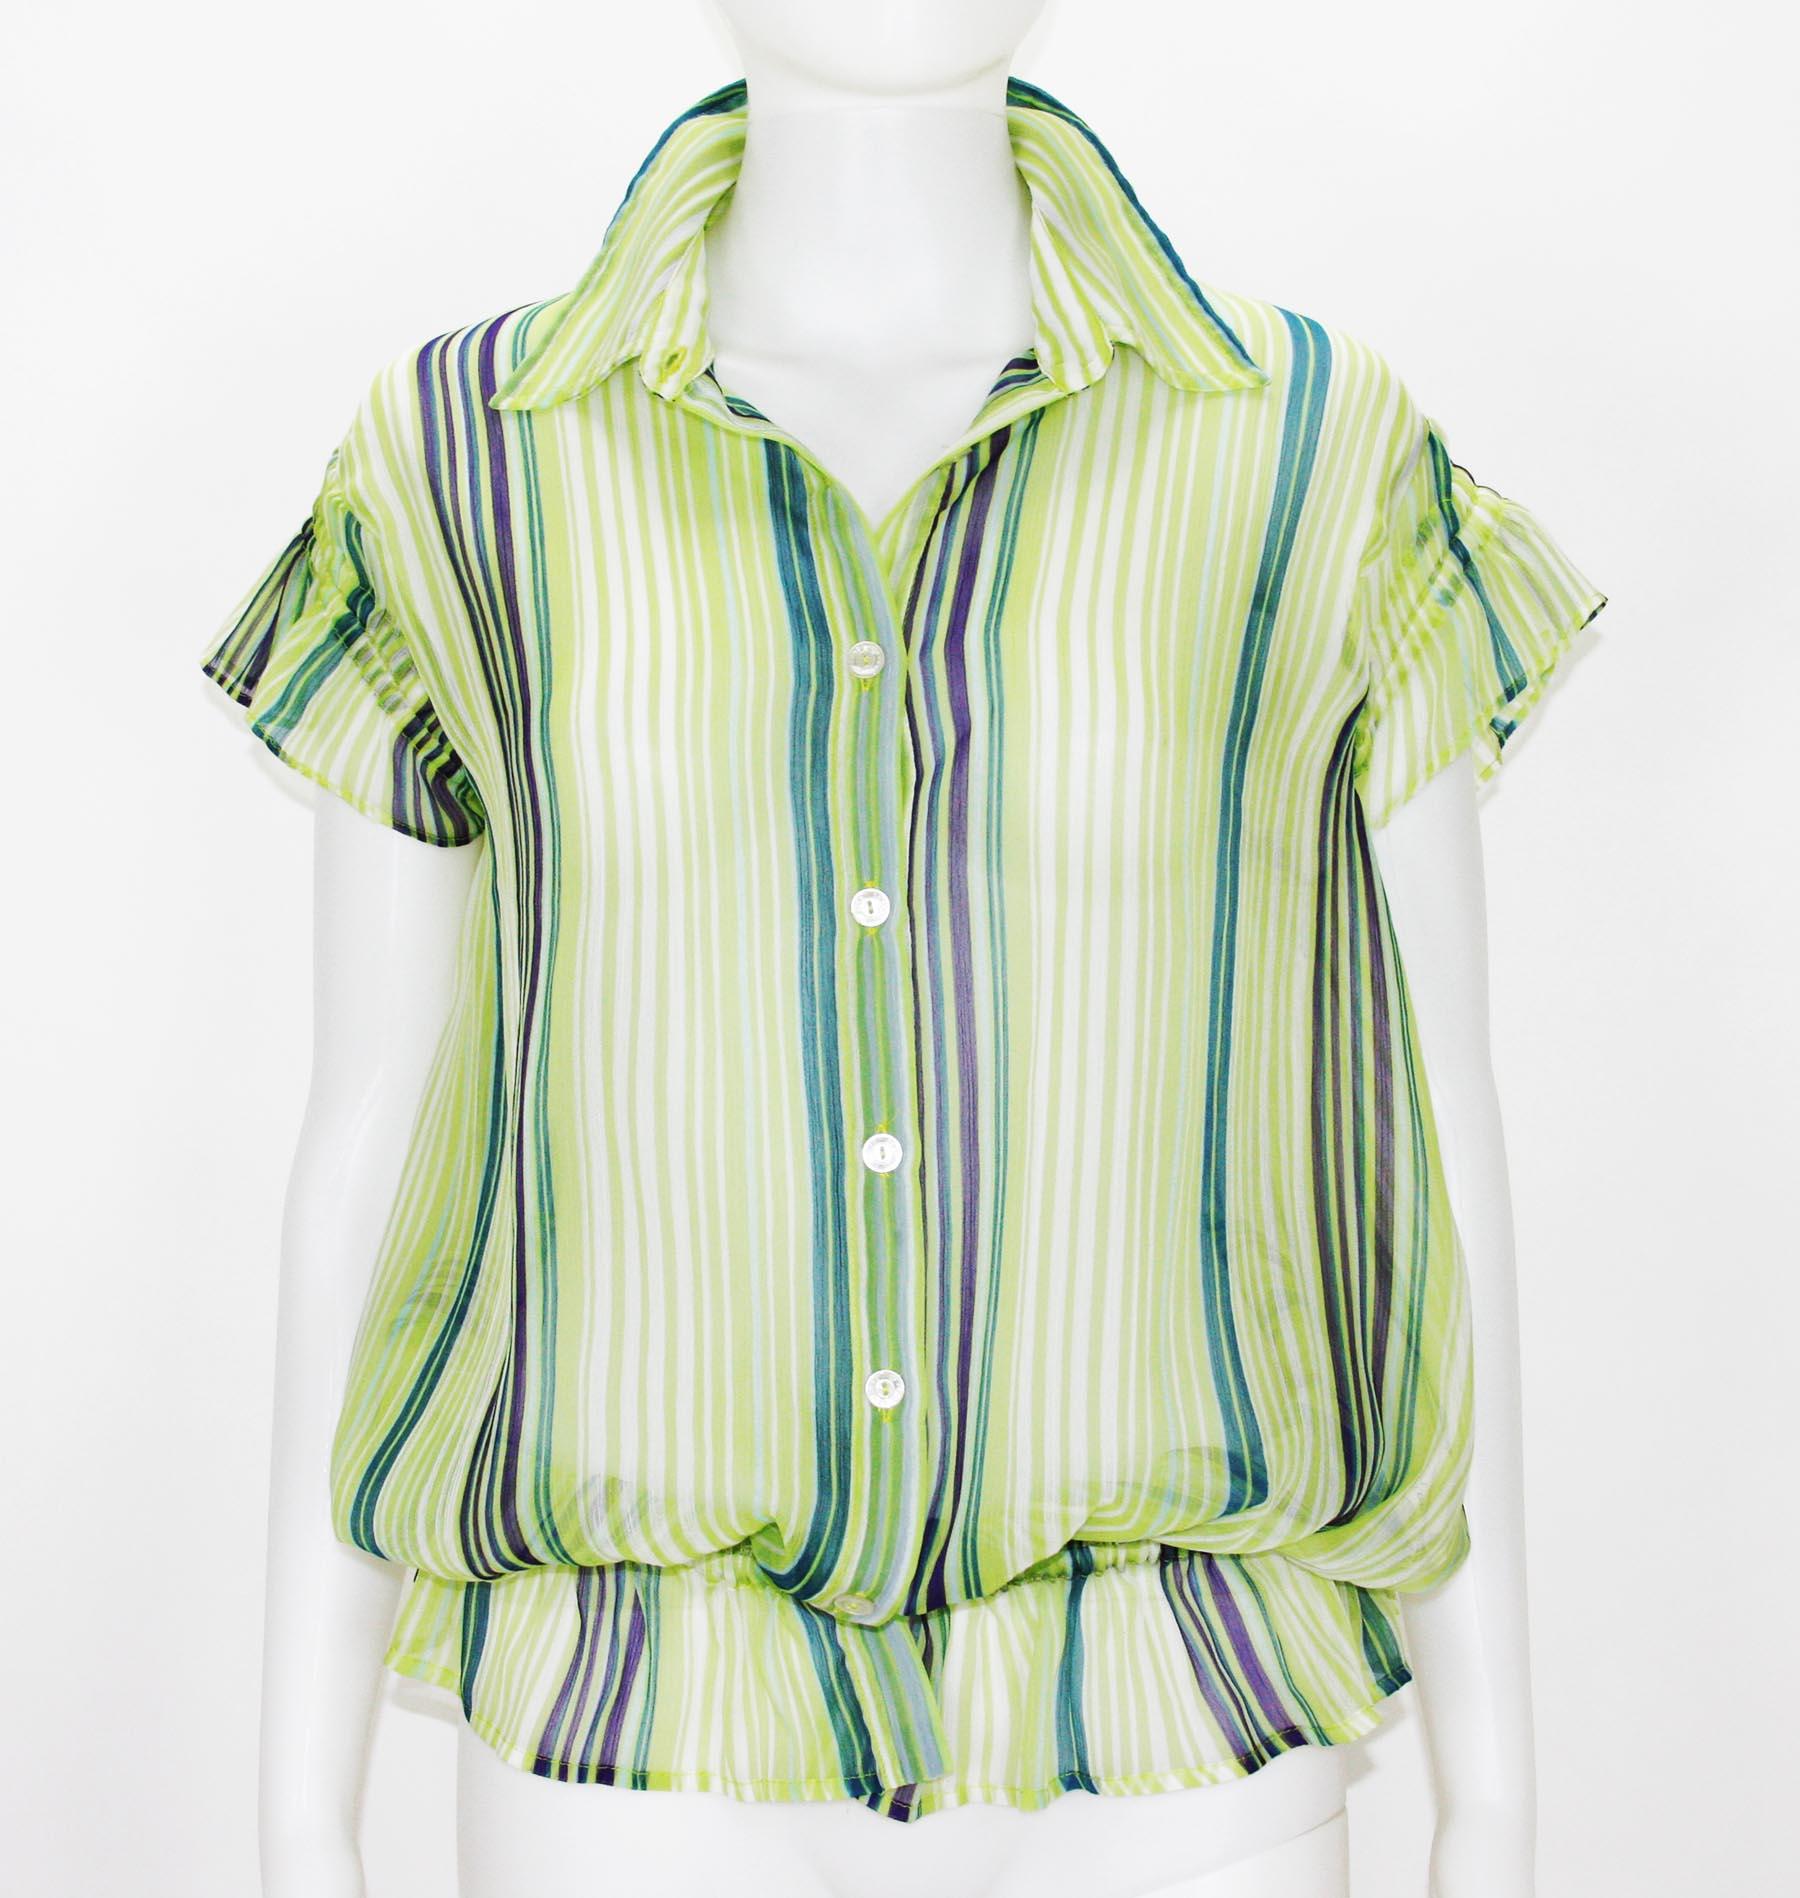 Gianfranco Ferre is known for their luxurious clothing that portray the feelings of youth, freedom and experience. 
New GIANFRANCO FERRE Sexy Sheer Top Blouse
Designer size - L
Multicolor Sheer Fabric, Elasticated Waistband , Signature